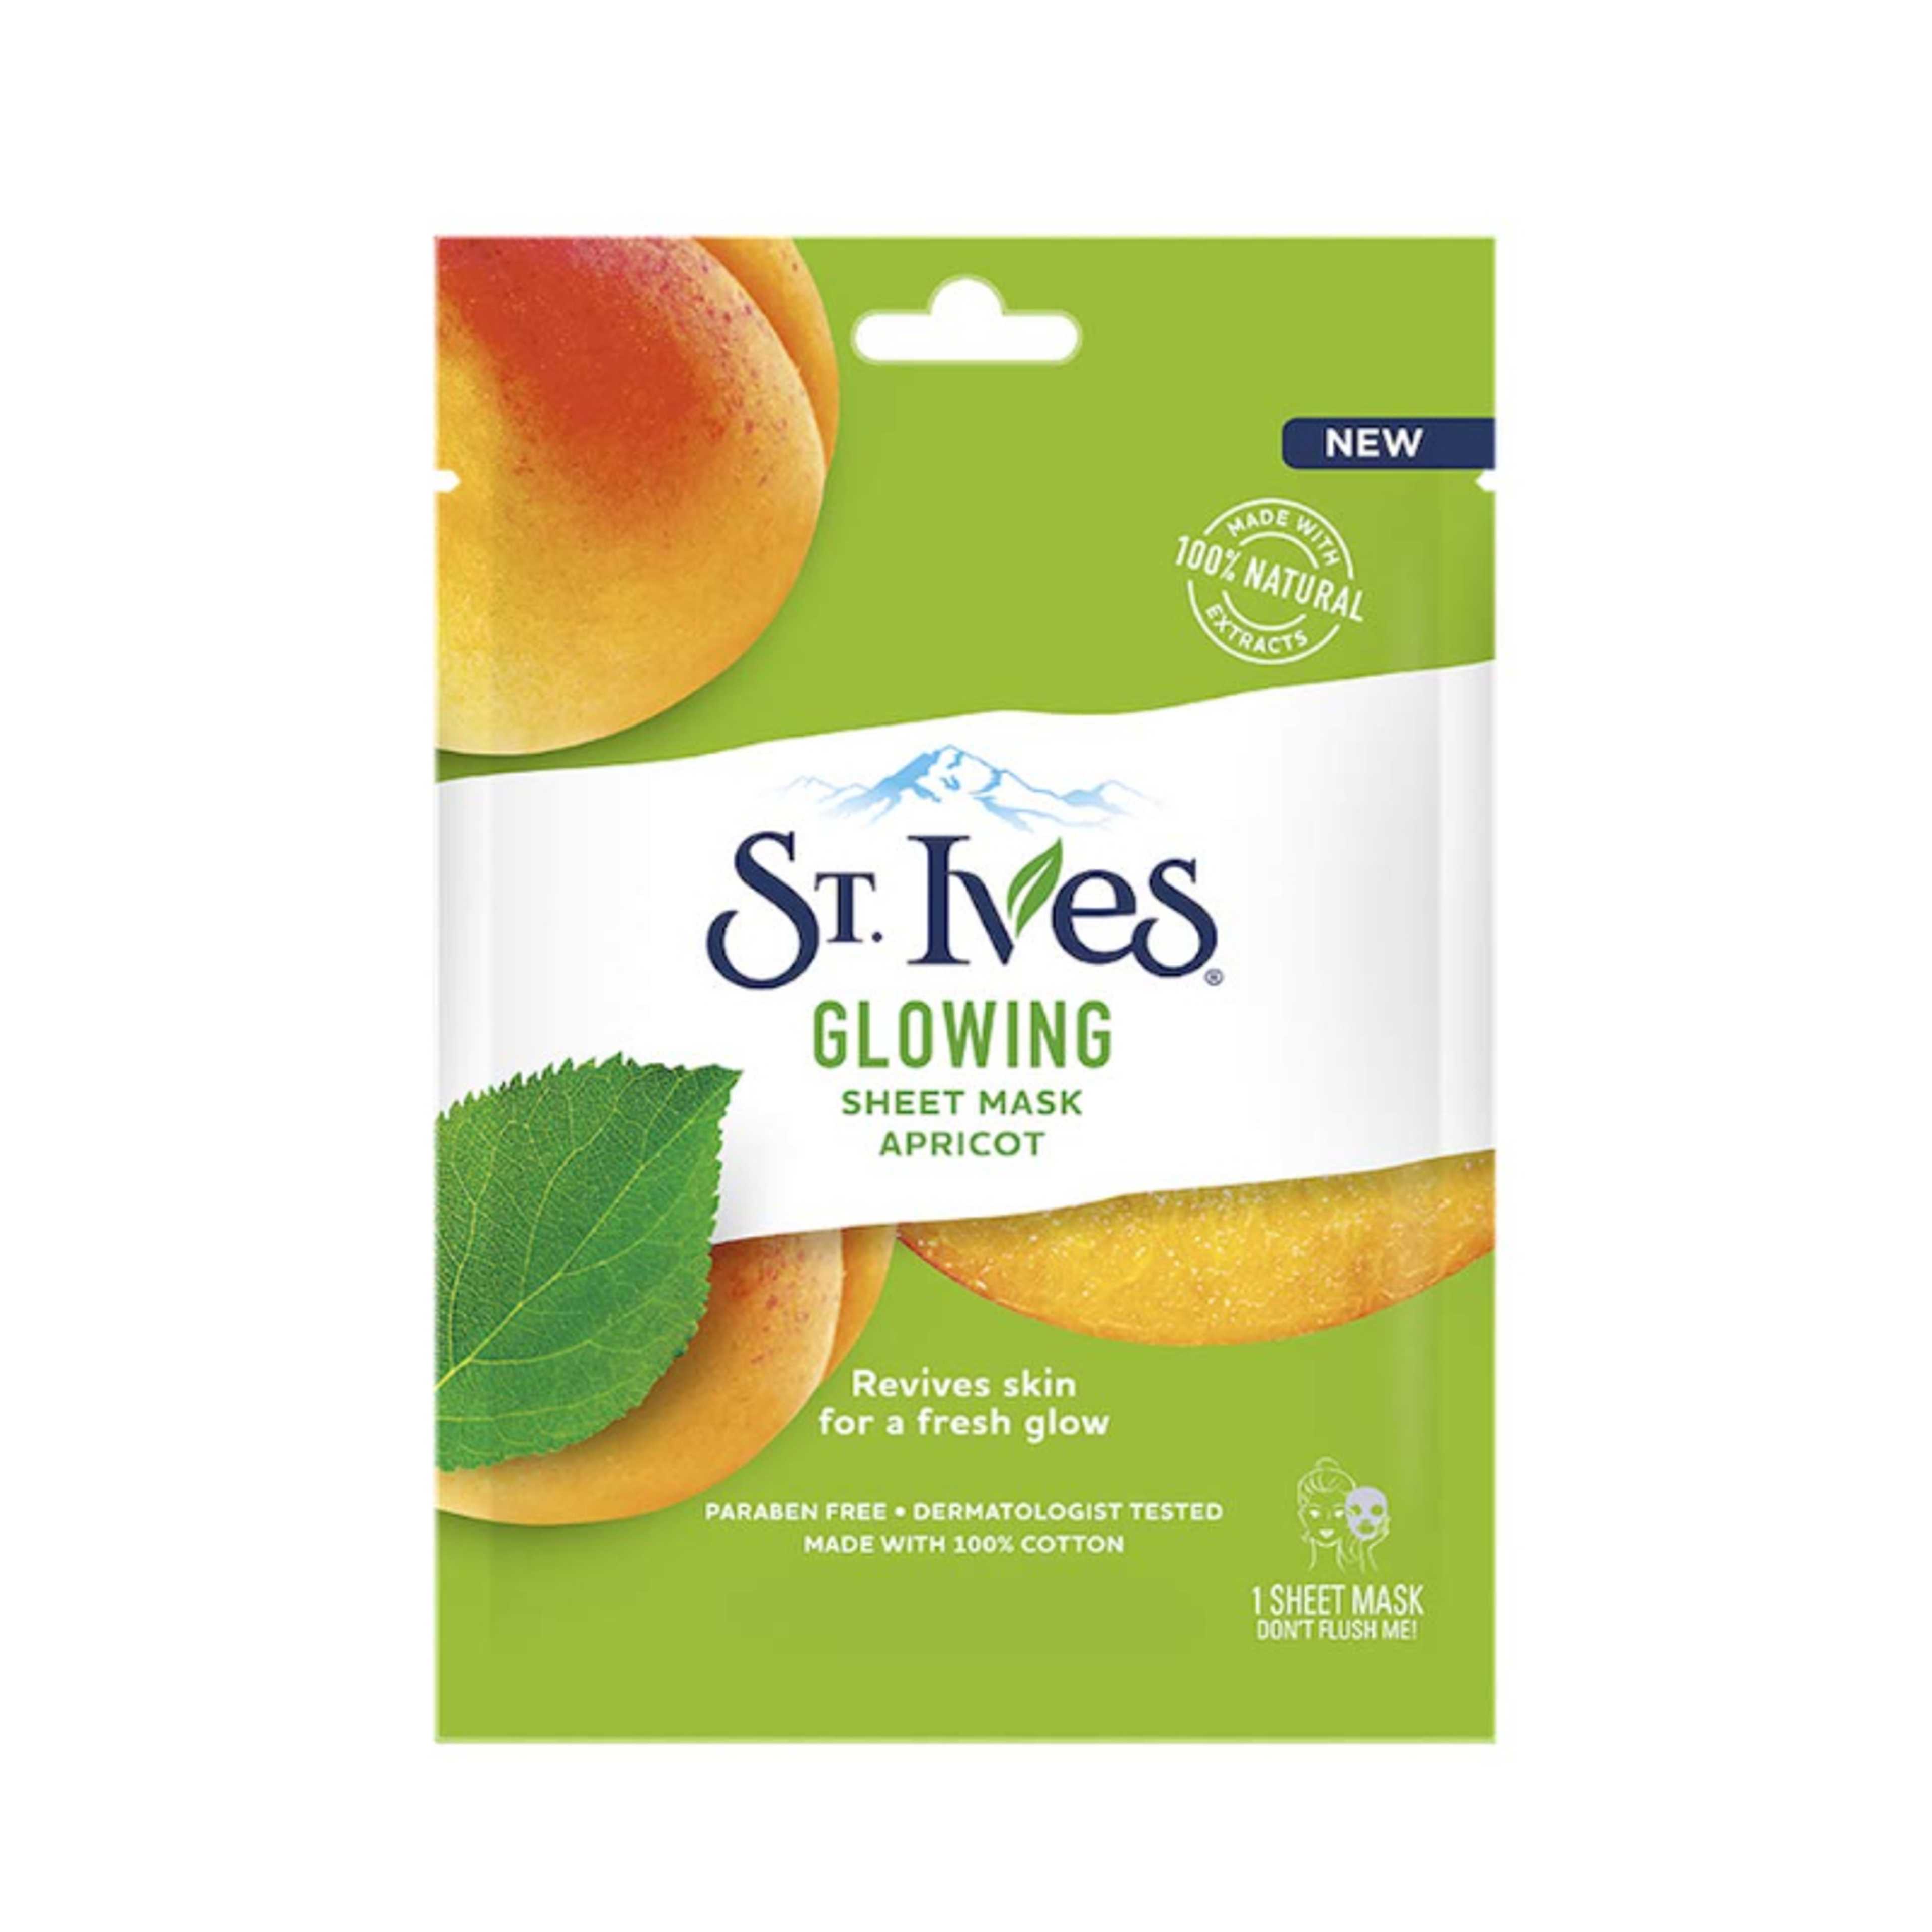 STIVES GLOWING SHEET MASK APRICOT 1'S (Imported)